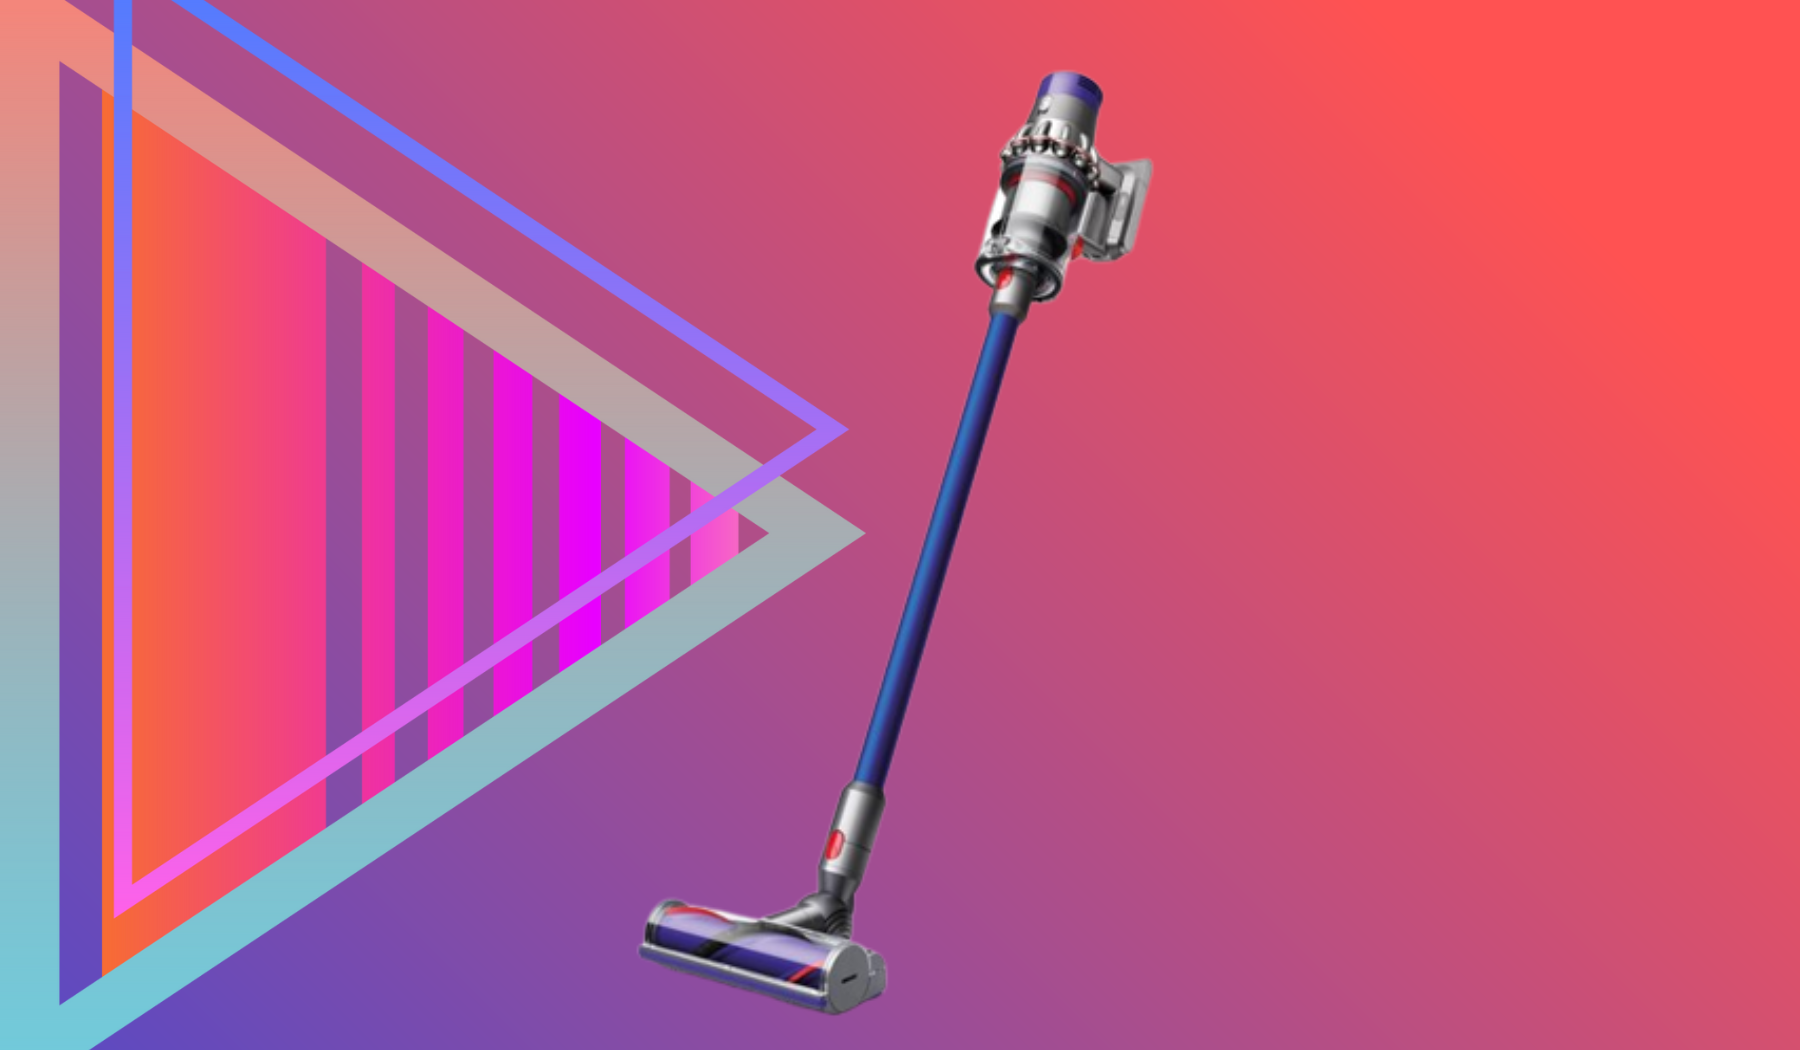 Dyson V10 vacuum and colorful triangle graphic on red and purple background